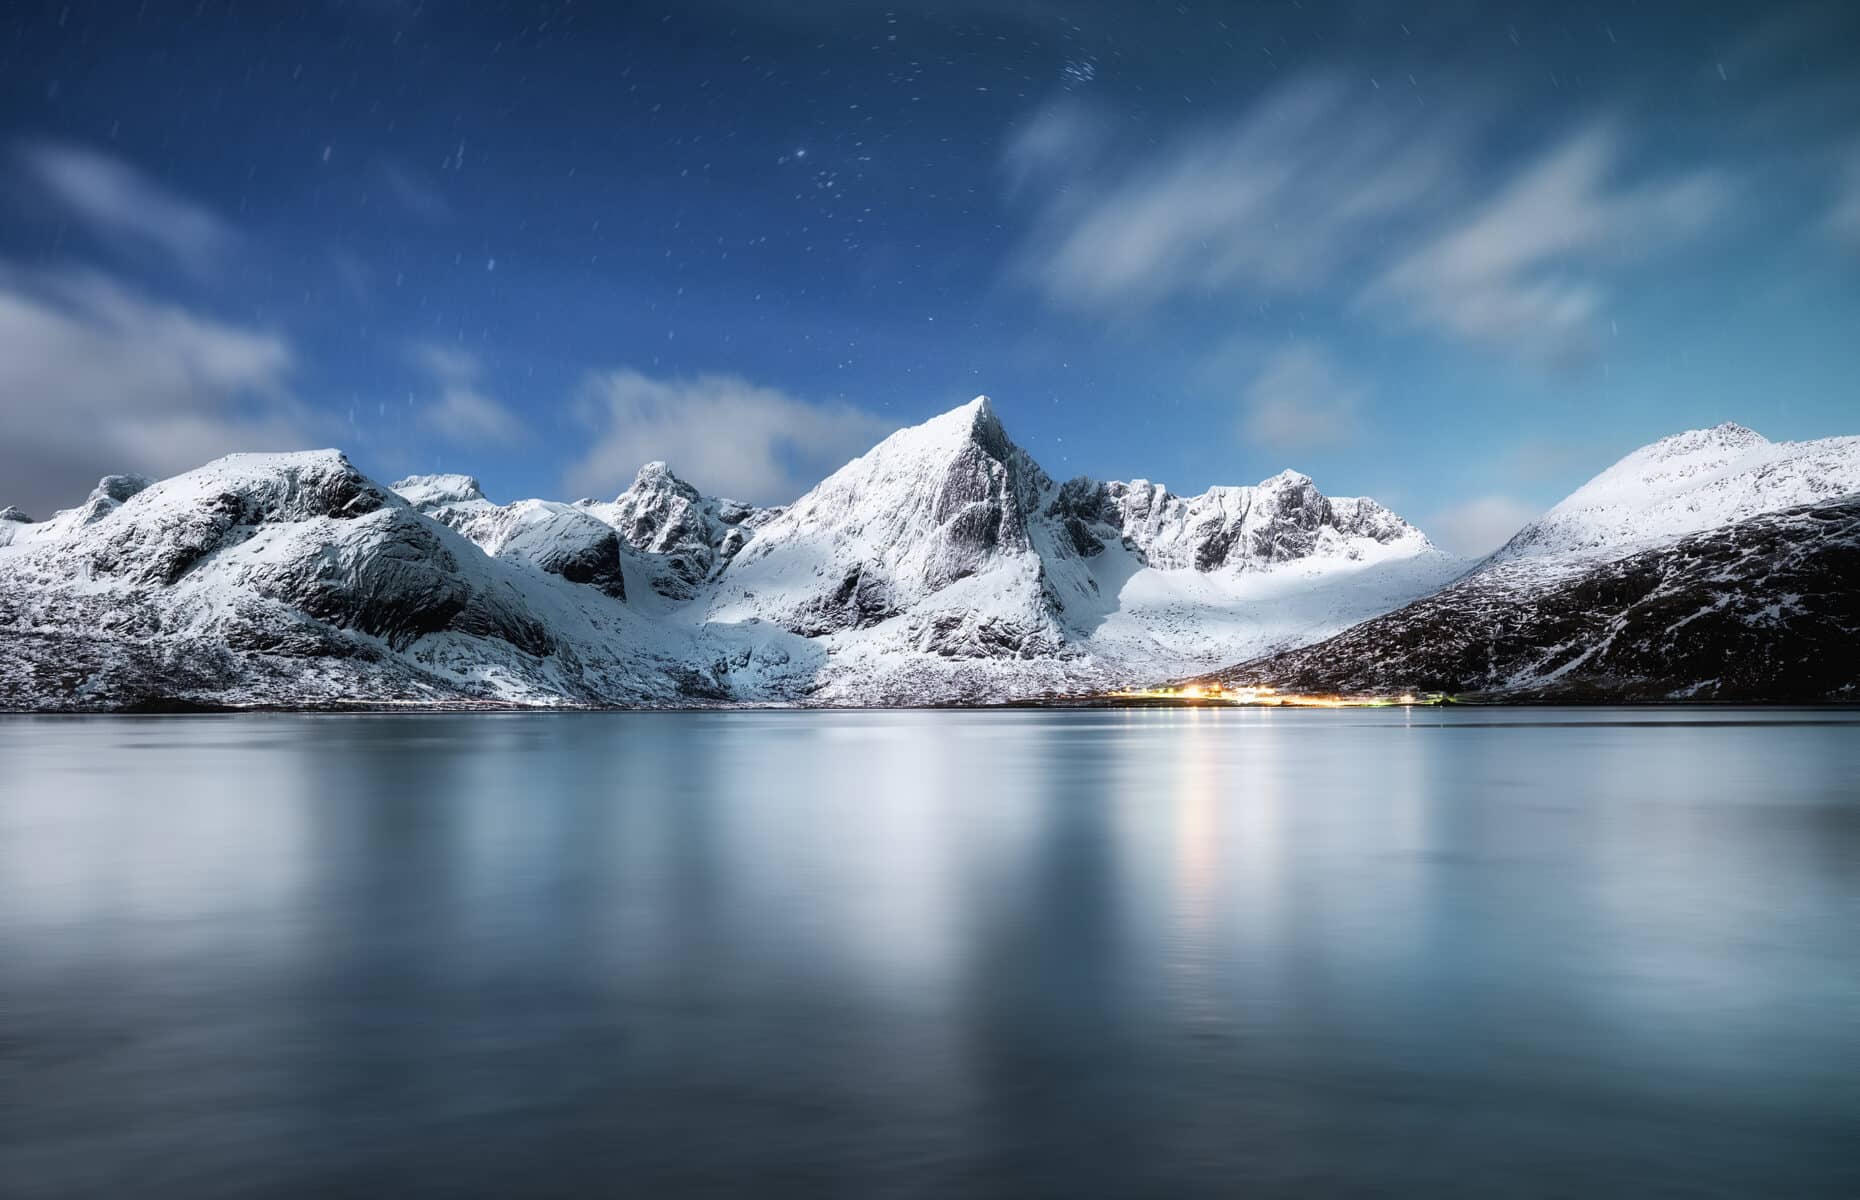 Mountains and reflections on water at night. Winter landscape. The sky with stars and clouds in motion. Nature as a background. Norway - travel